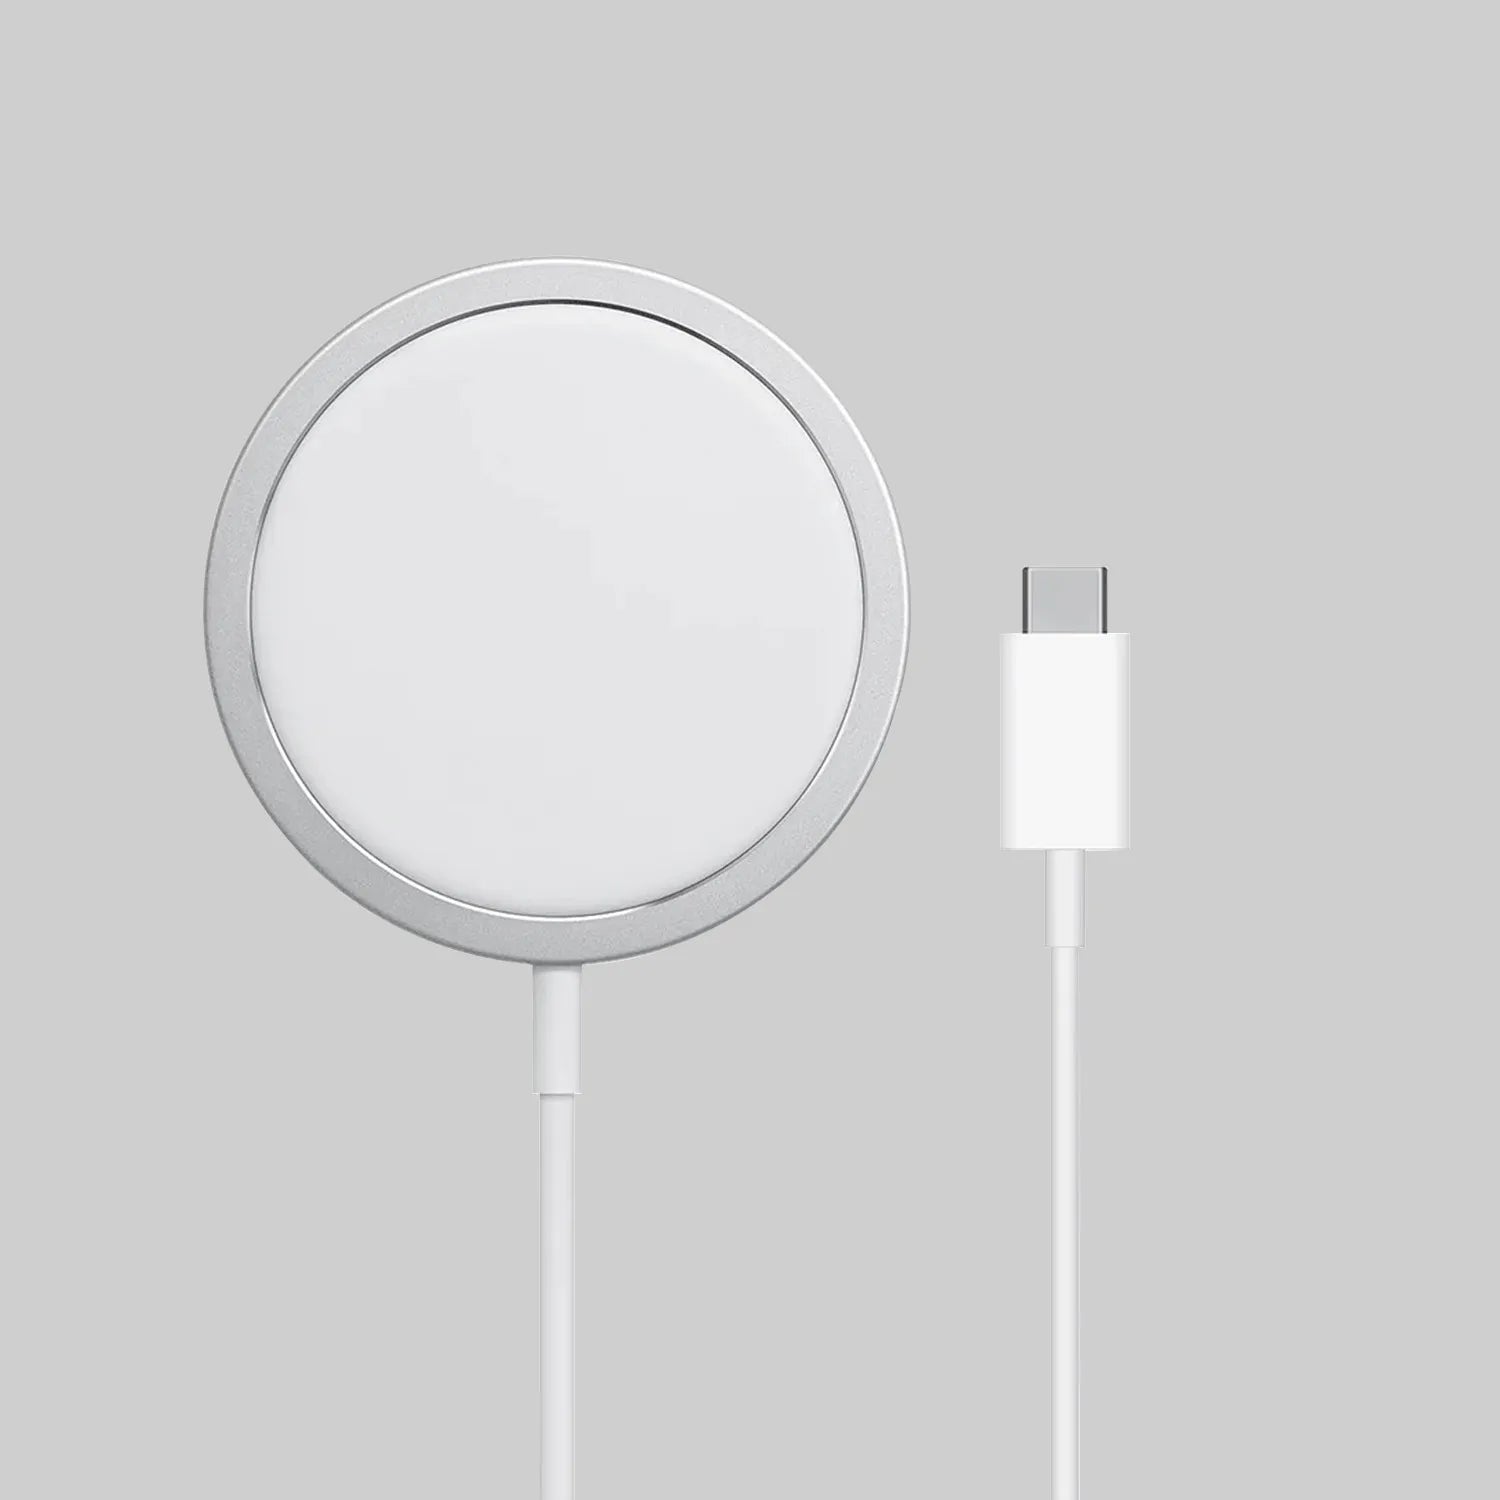 15W Type C Magnetic Wireless Charger for iPhone